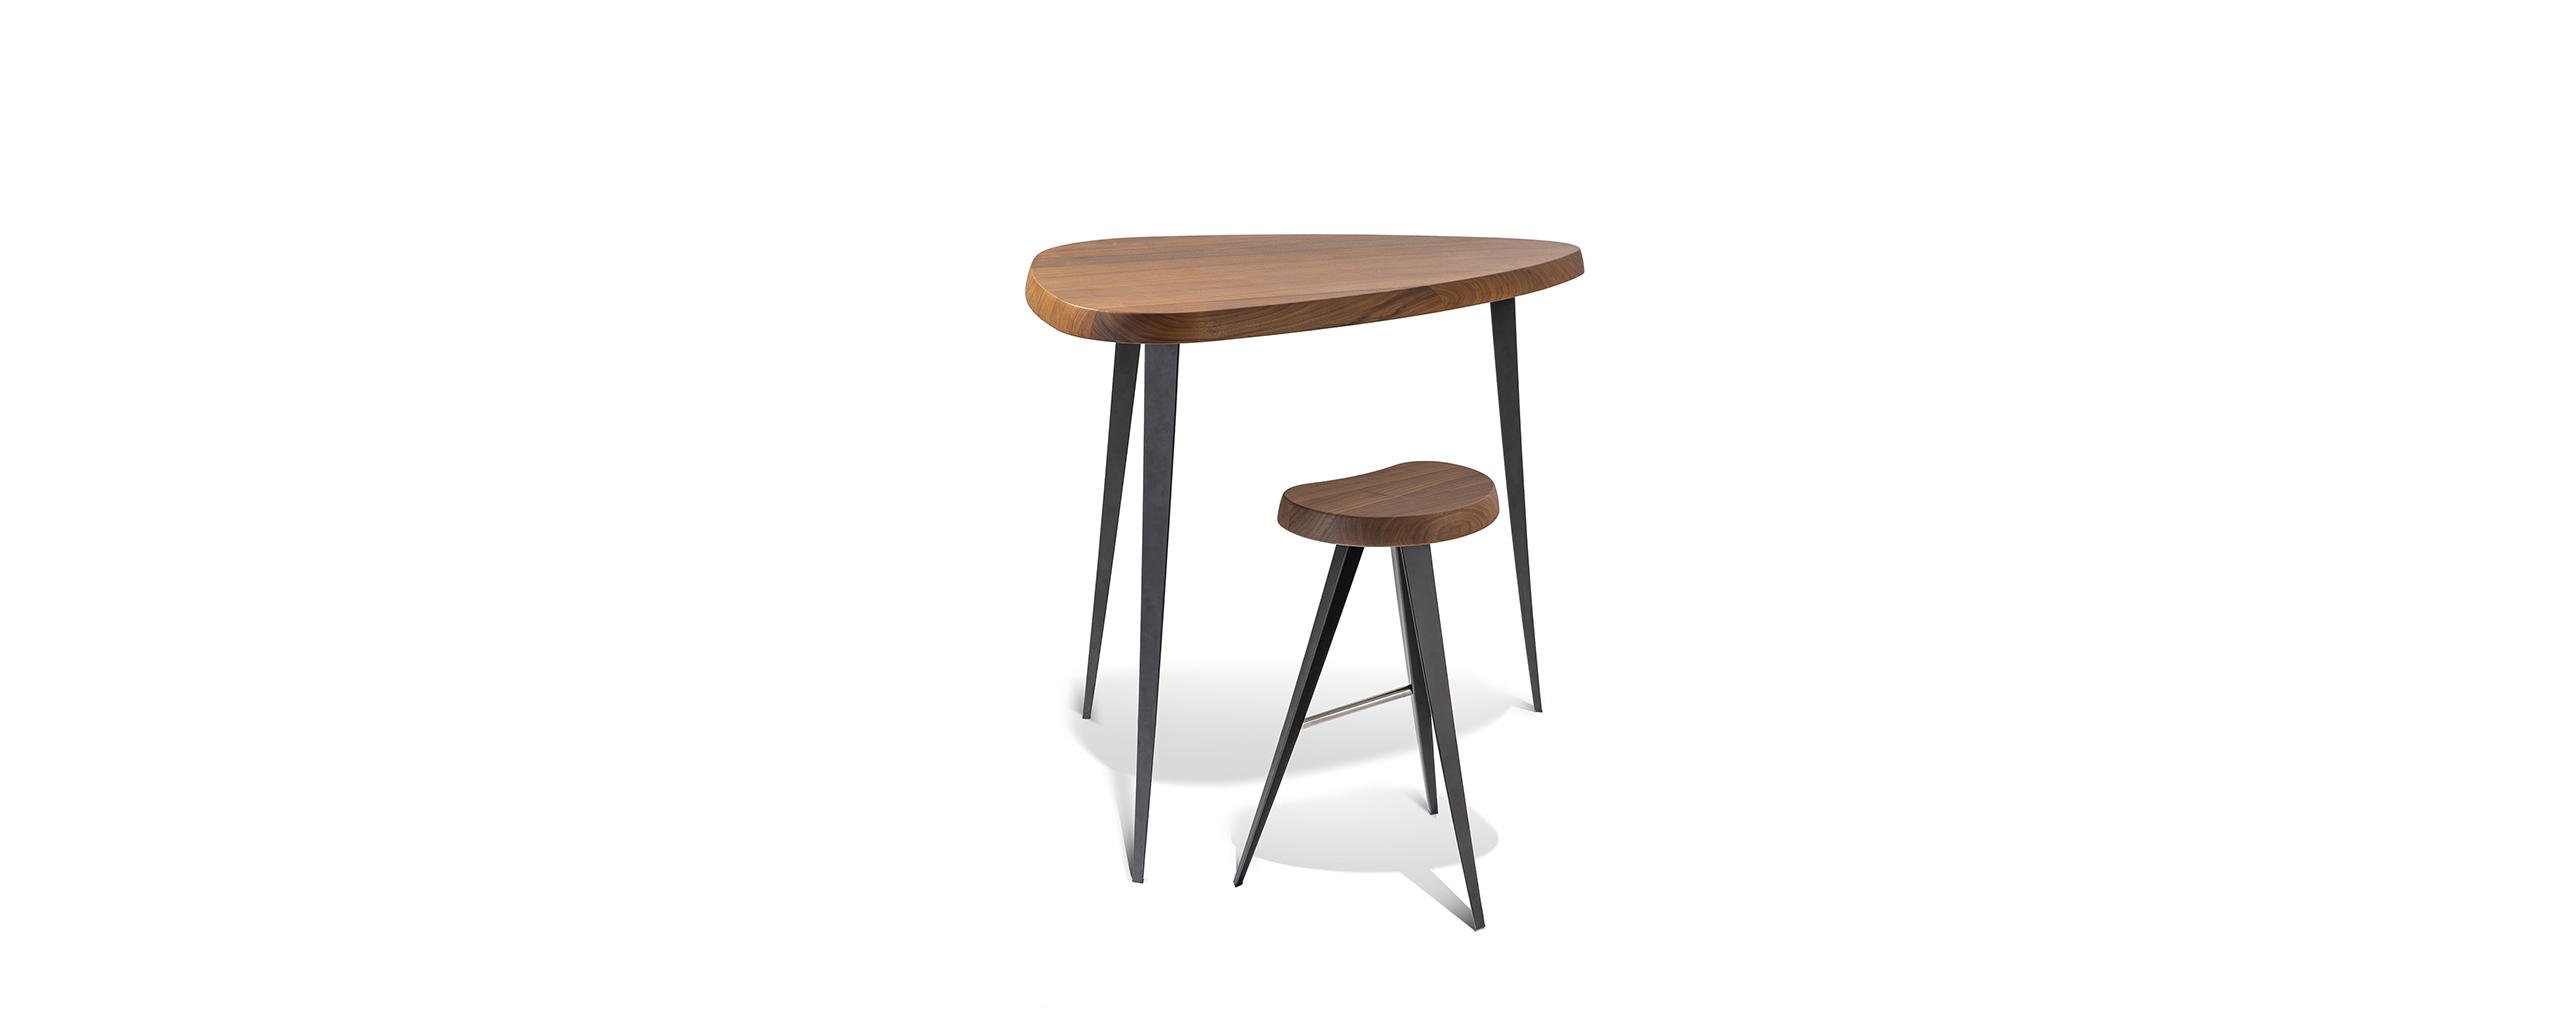 1_cassina_mexique_charlotte_perriand_bar_stool_and_table